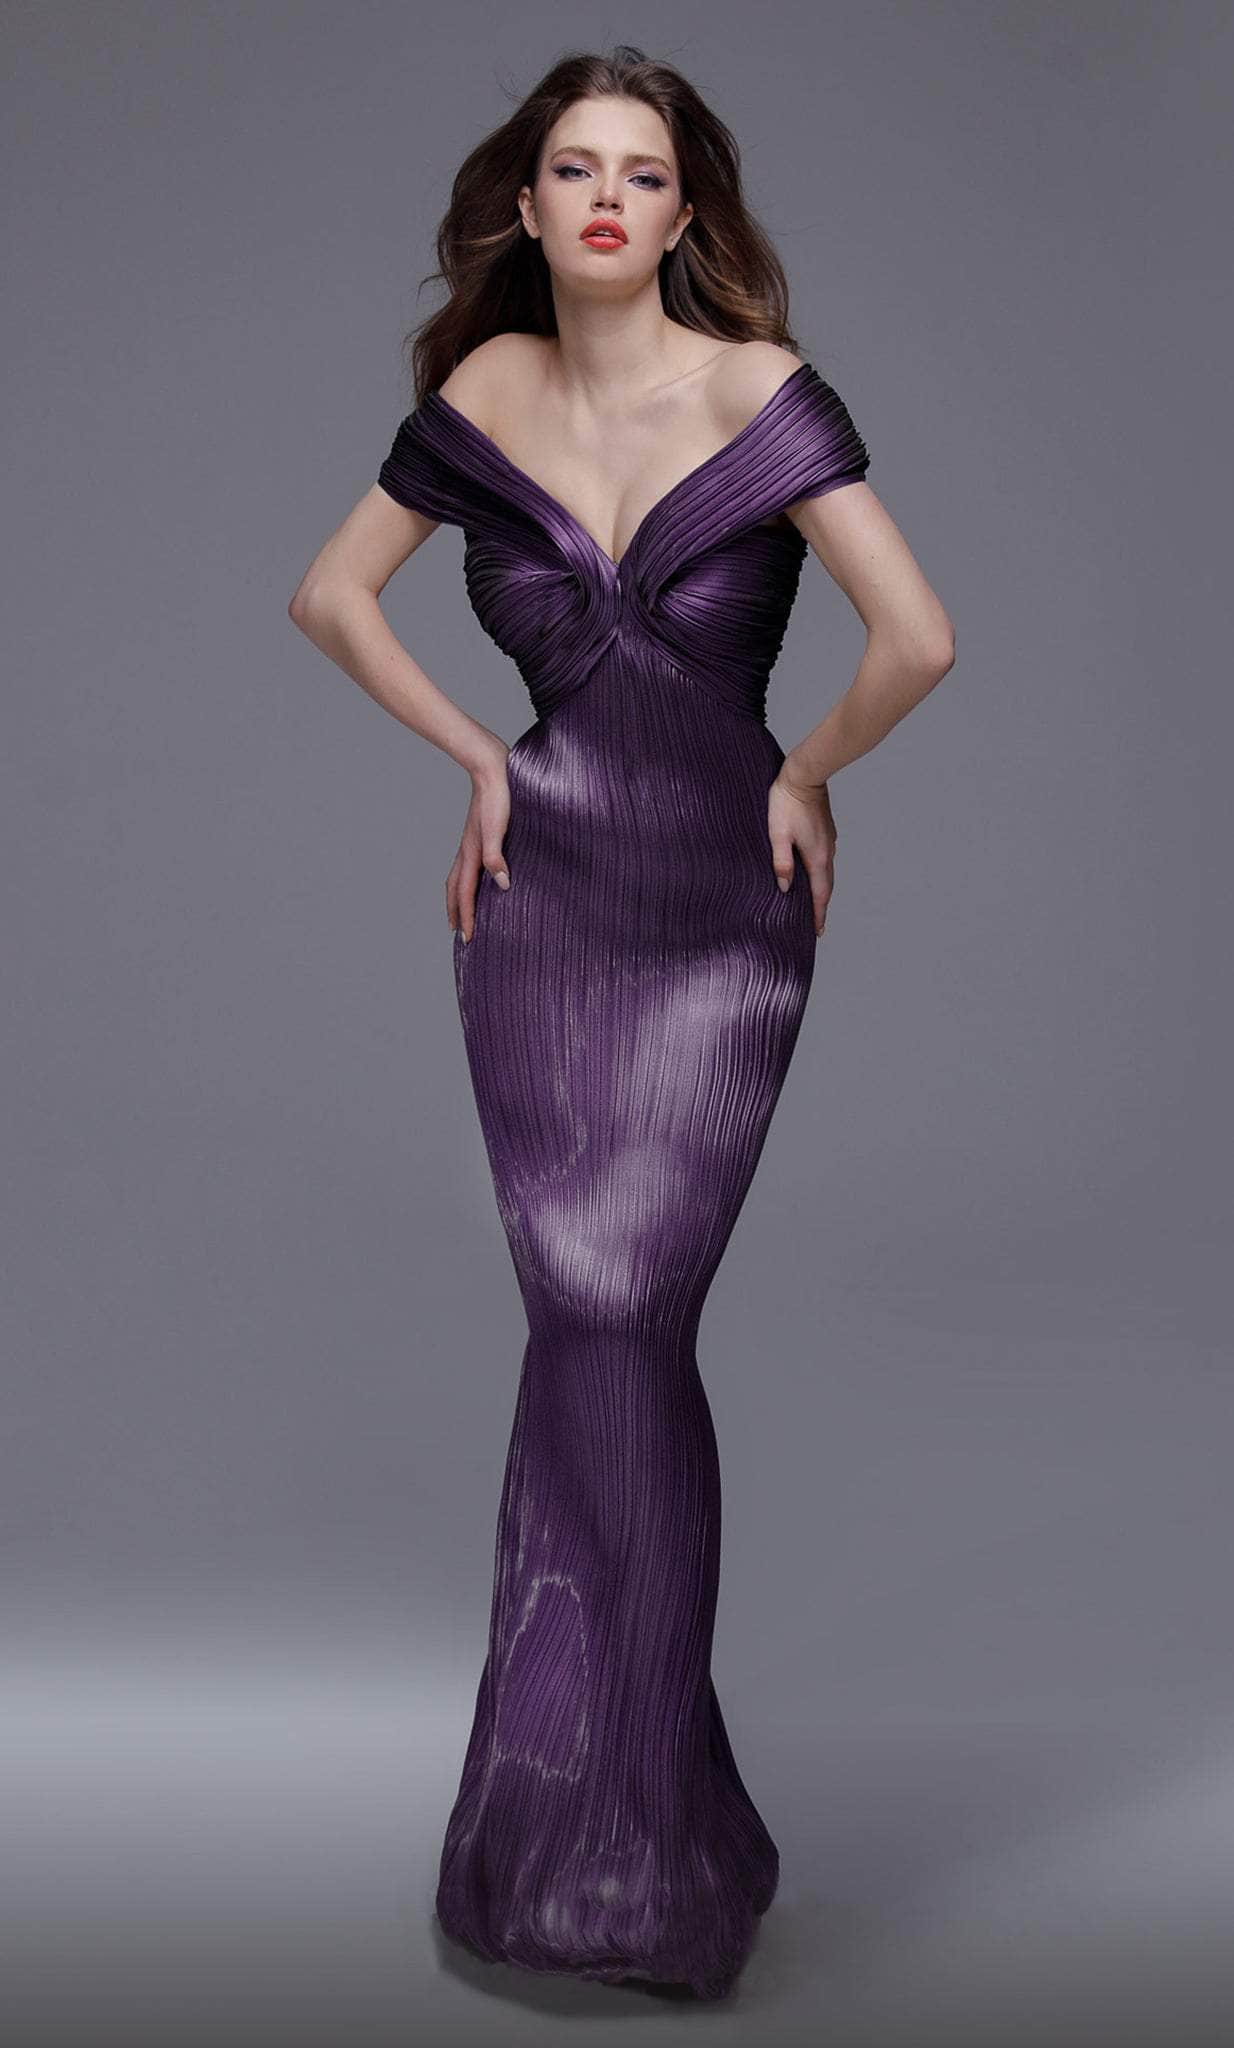 Image of MNM Couture 2729 - Metallic Pleated Evening Gown